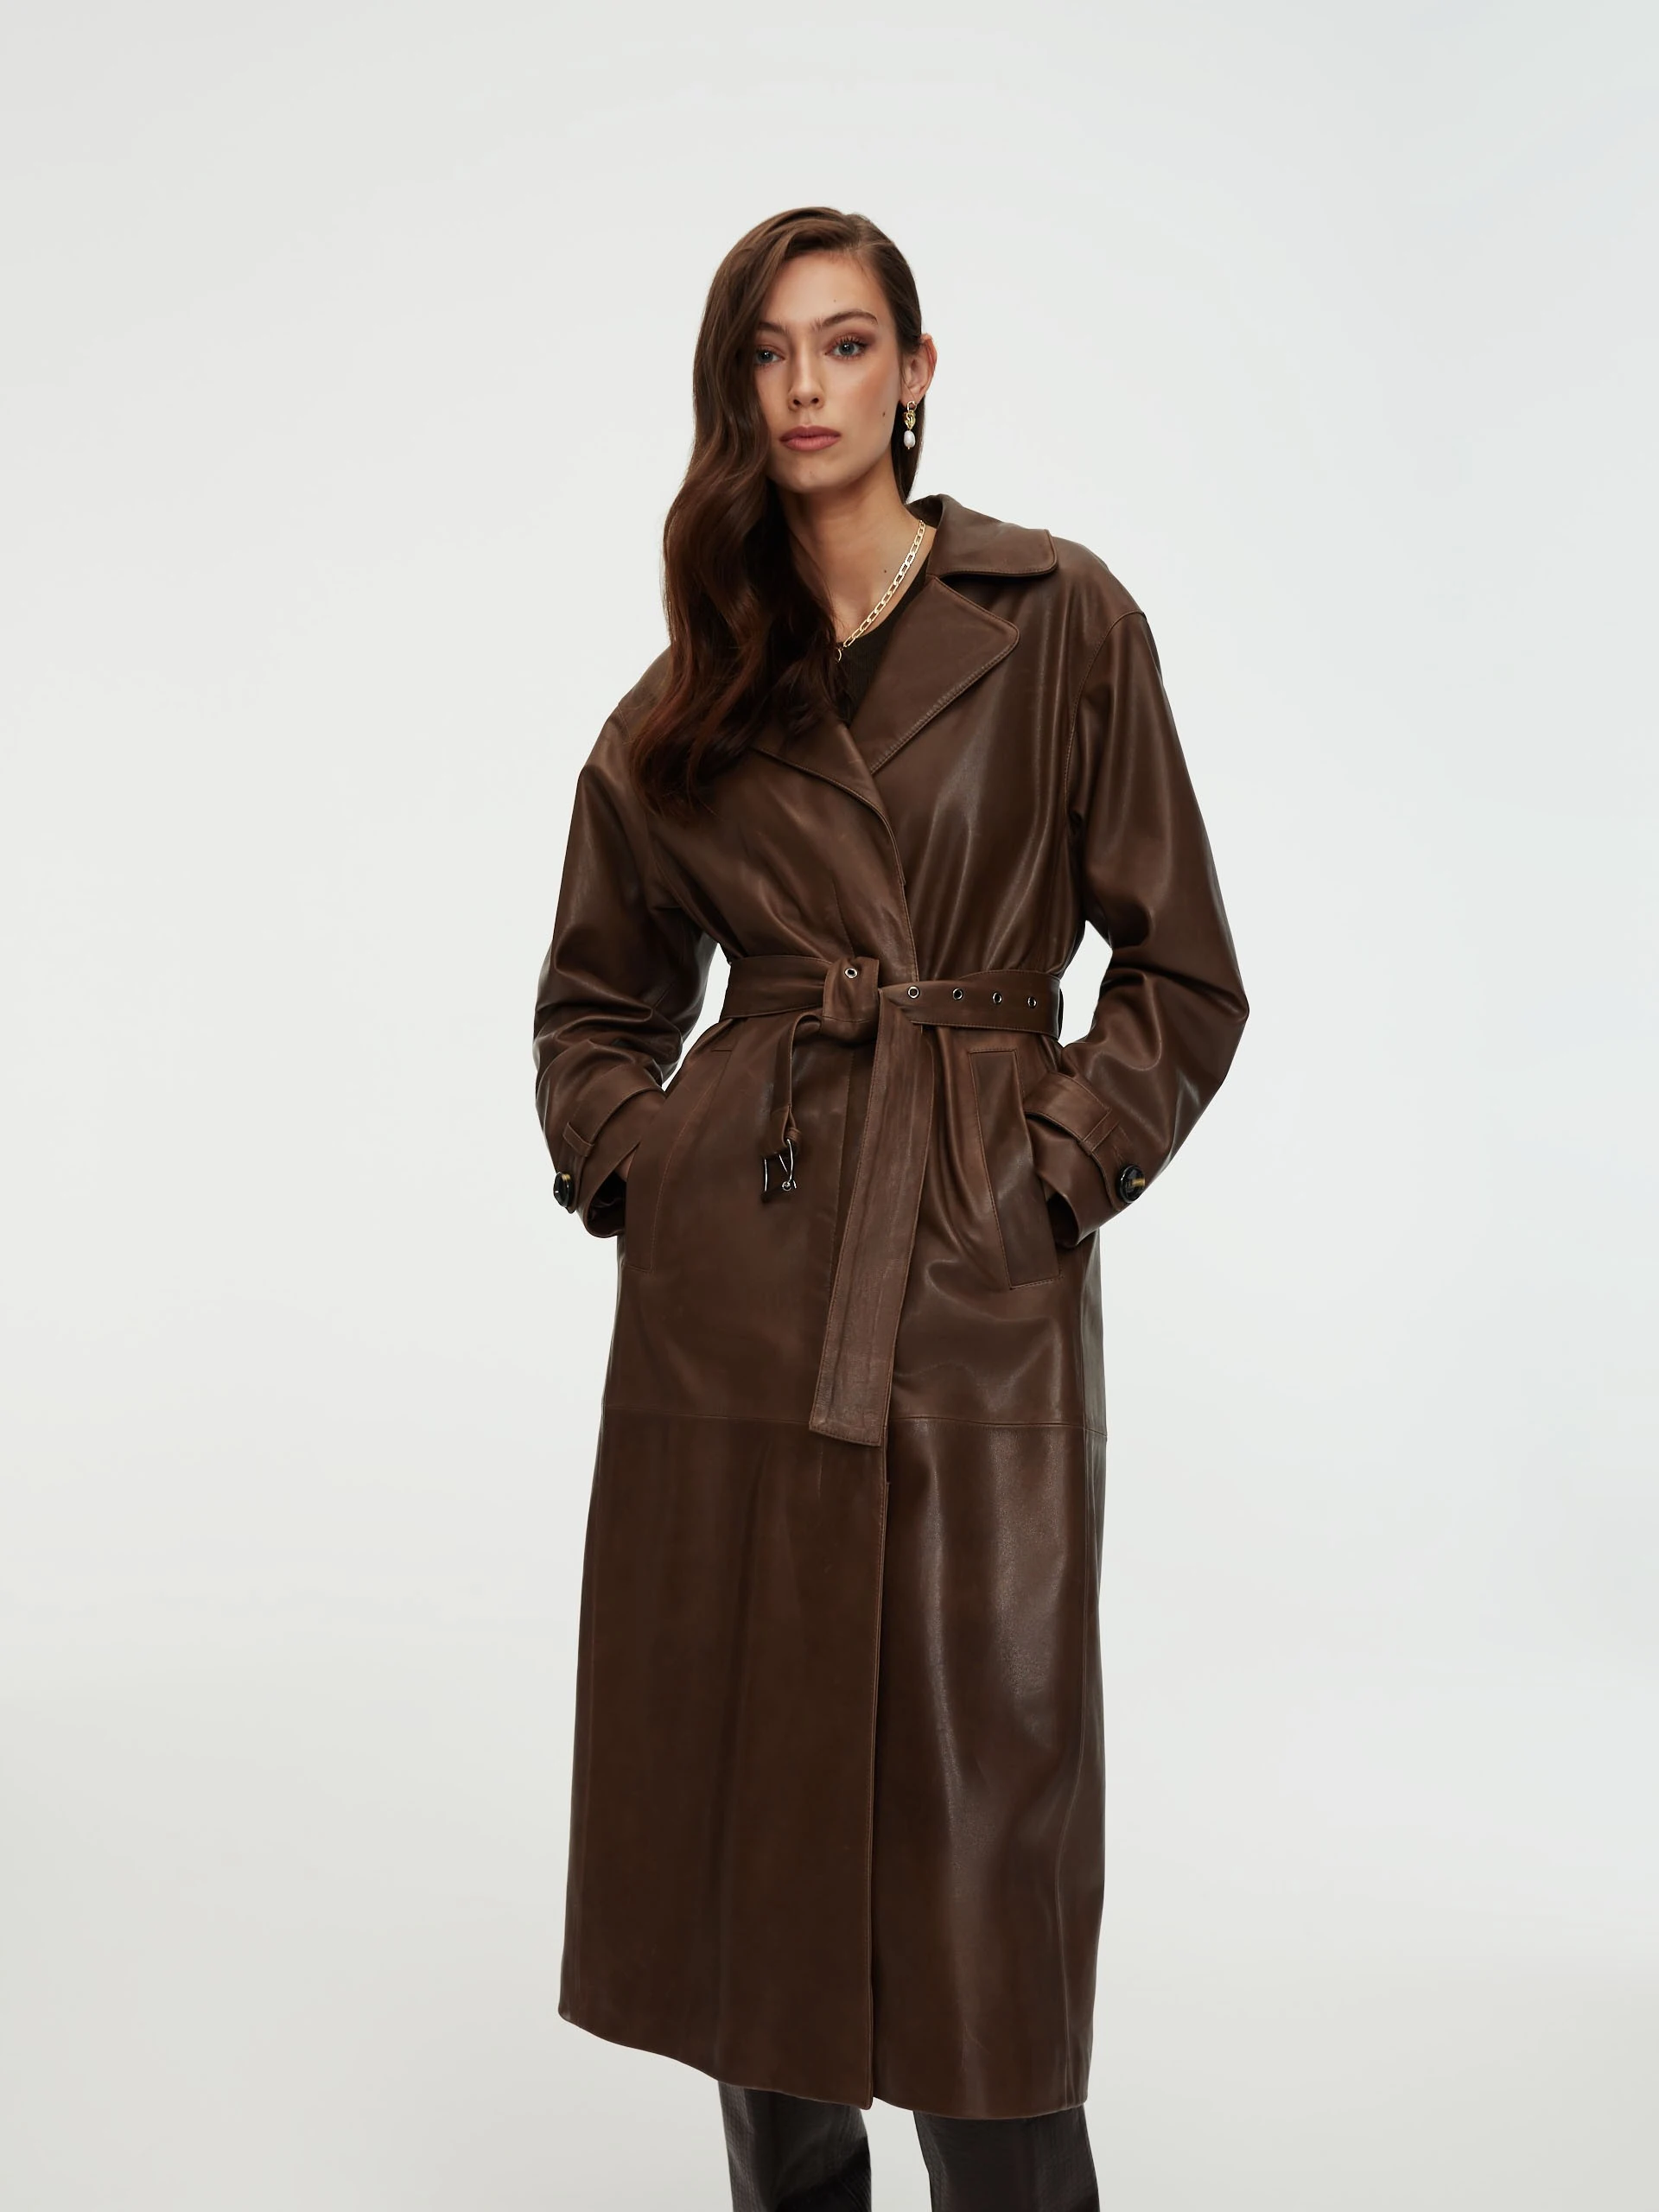 Leather coat in brown color